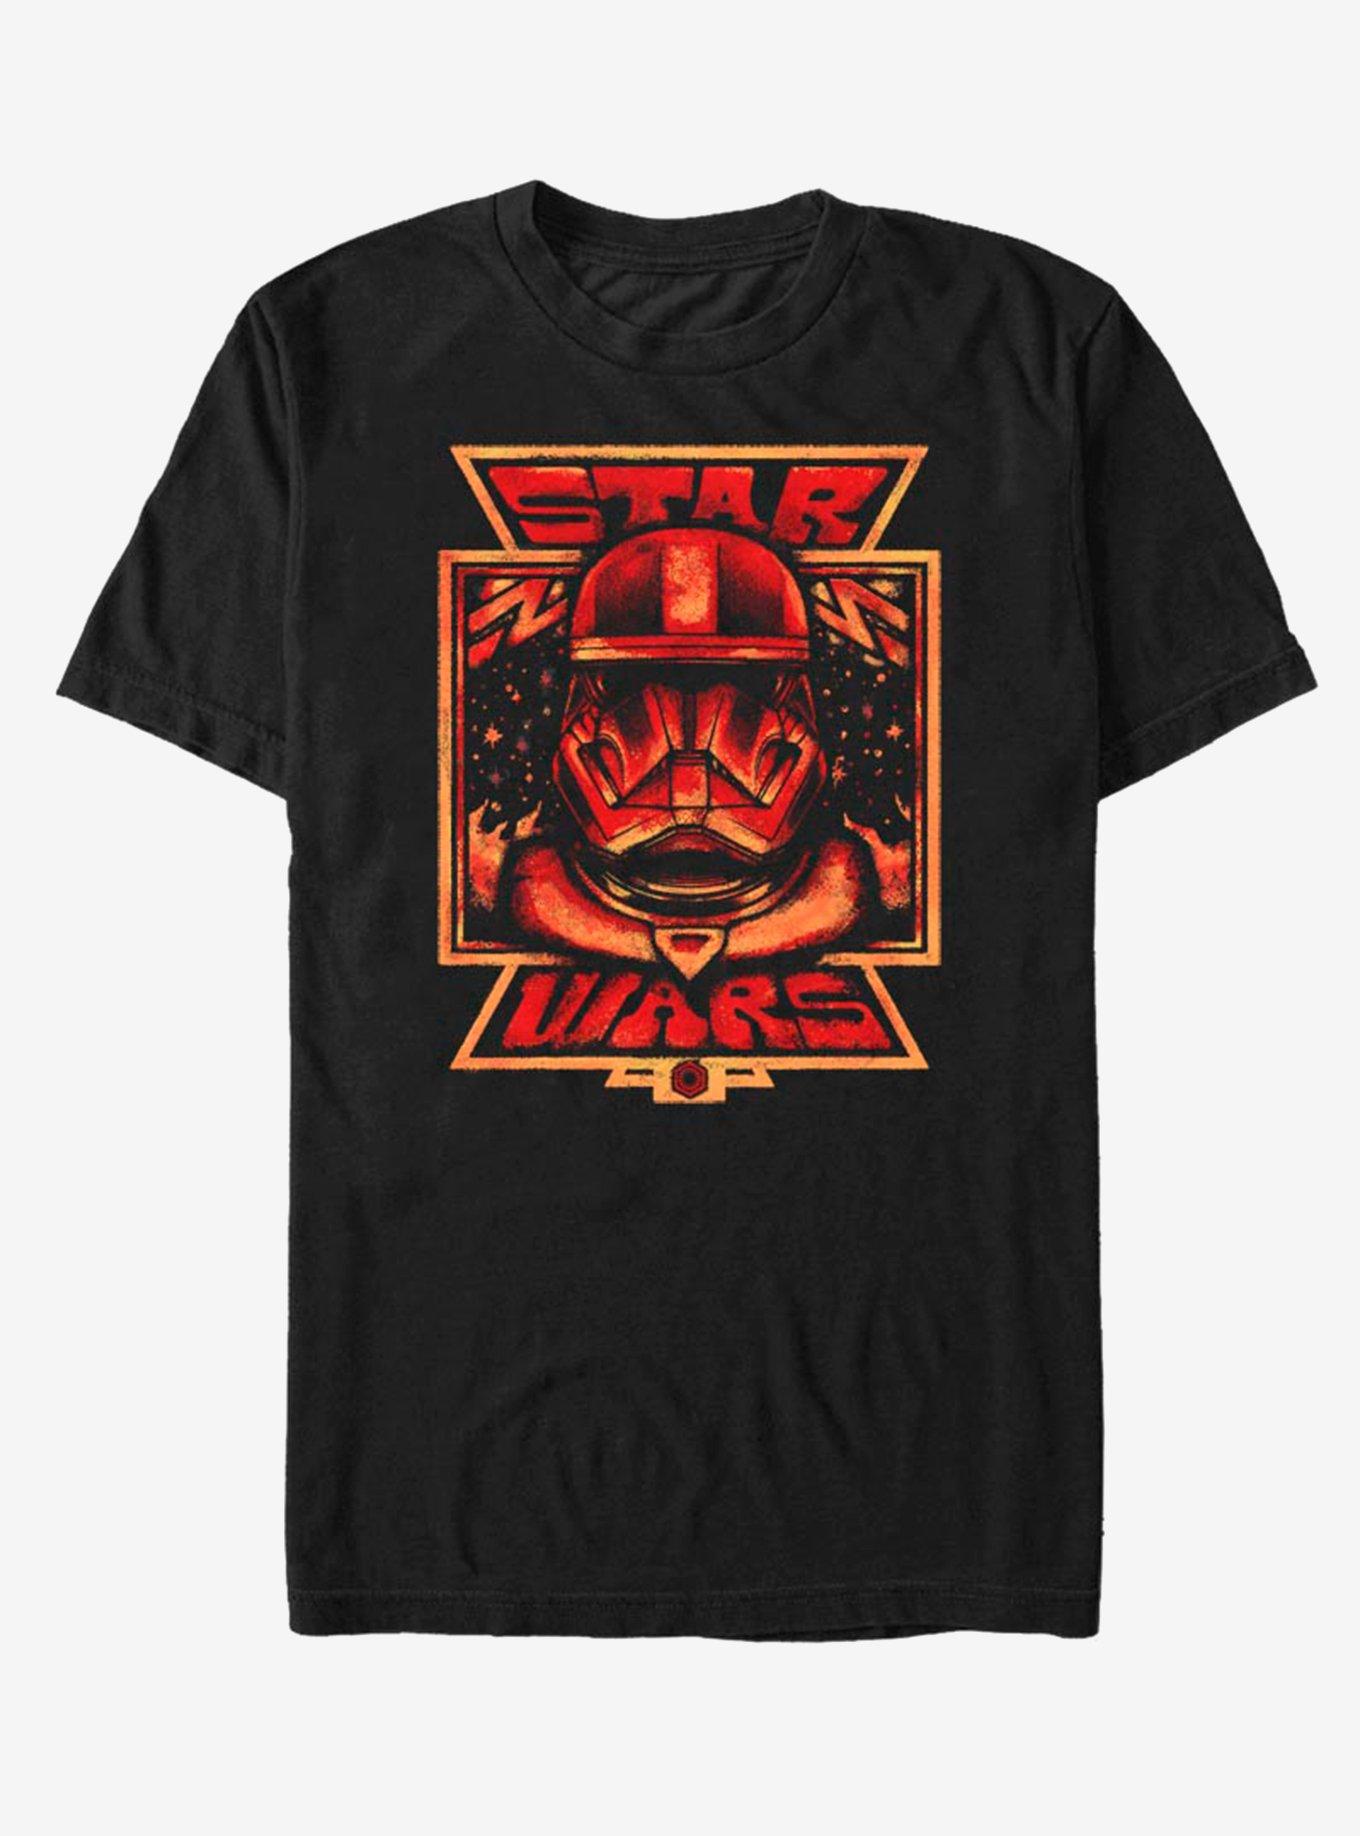 Star Wars Episode IX The Rise Of Skywalker Red Perspective T-Shirt ...